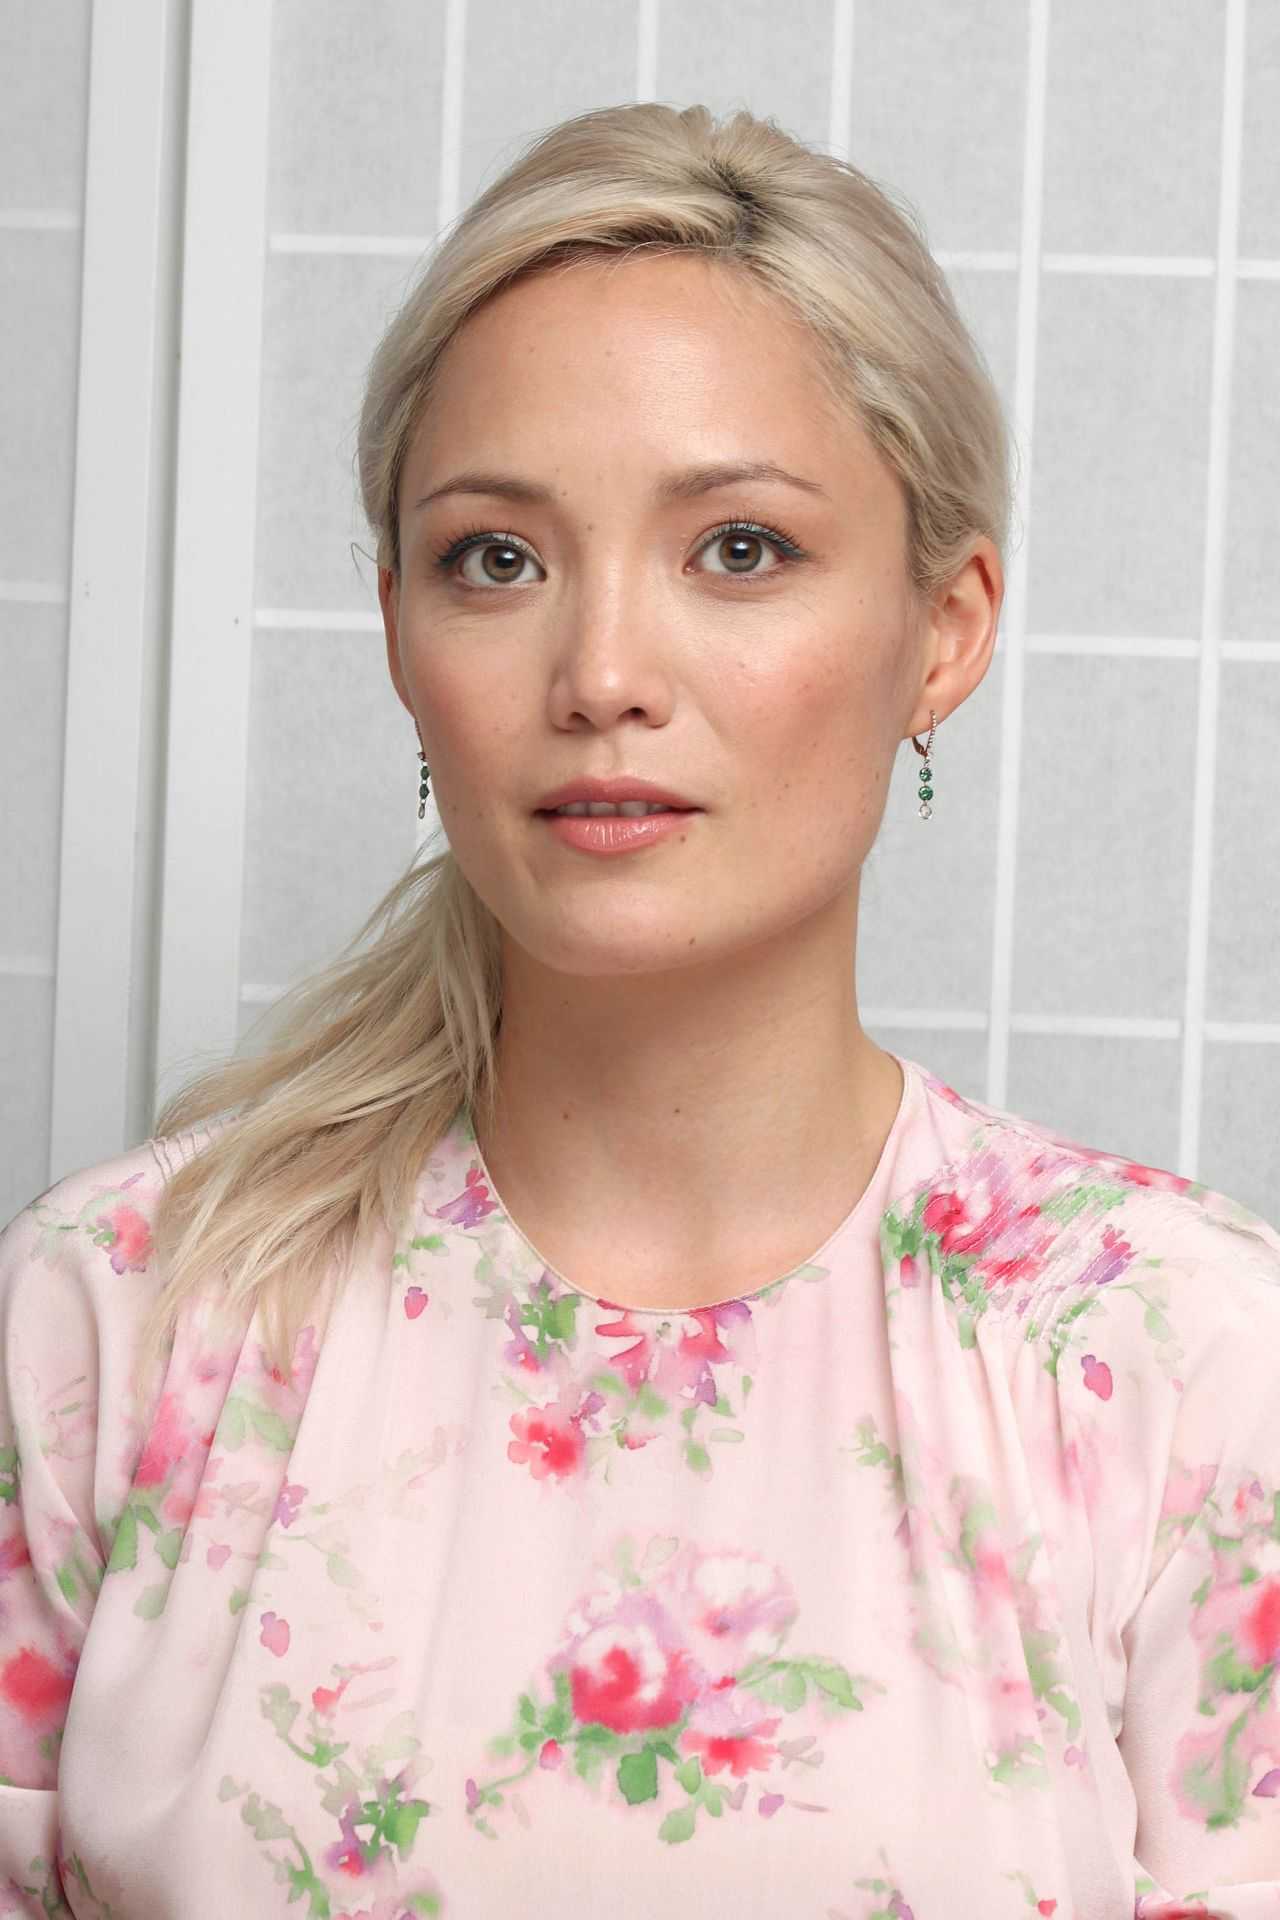 70+ Hot Pictures Of Pom Klementieff Who Plays Mantis In Marvel Cinematic Universe 113